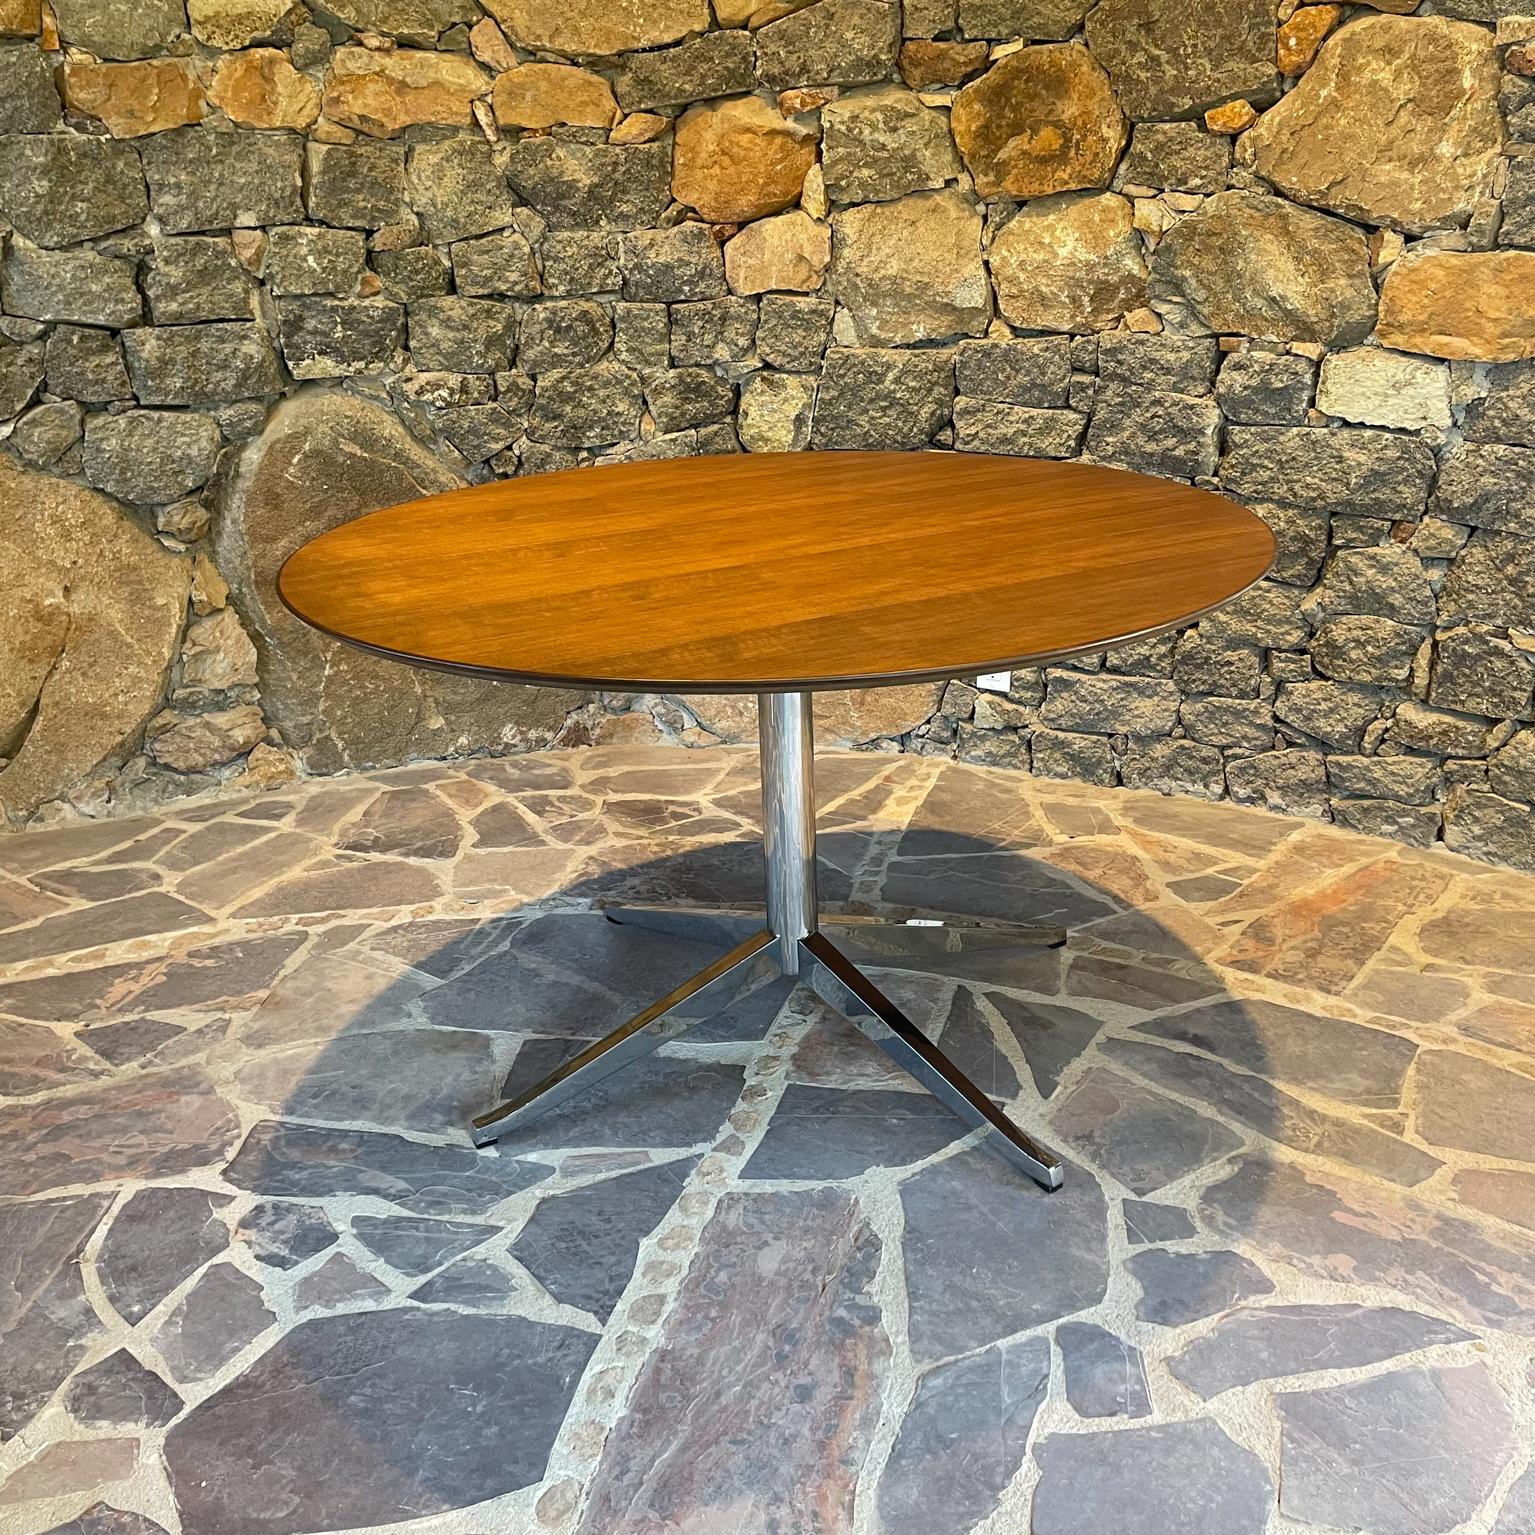 Knoll Table
Stunningly classic round Knoll table 1961. Florence Knoll design. Unmarked. 
Vintage midcentury classic Knoll 48 inch round dining table conference 
Table can be sold with new marble top or walnut wood top. See images. Your